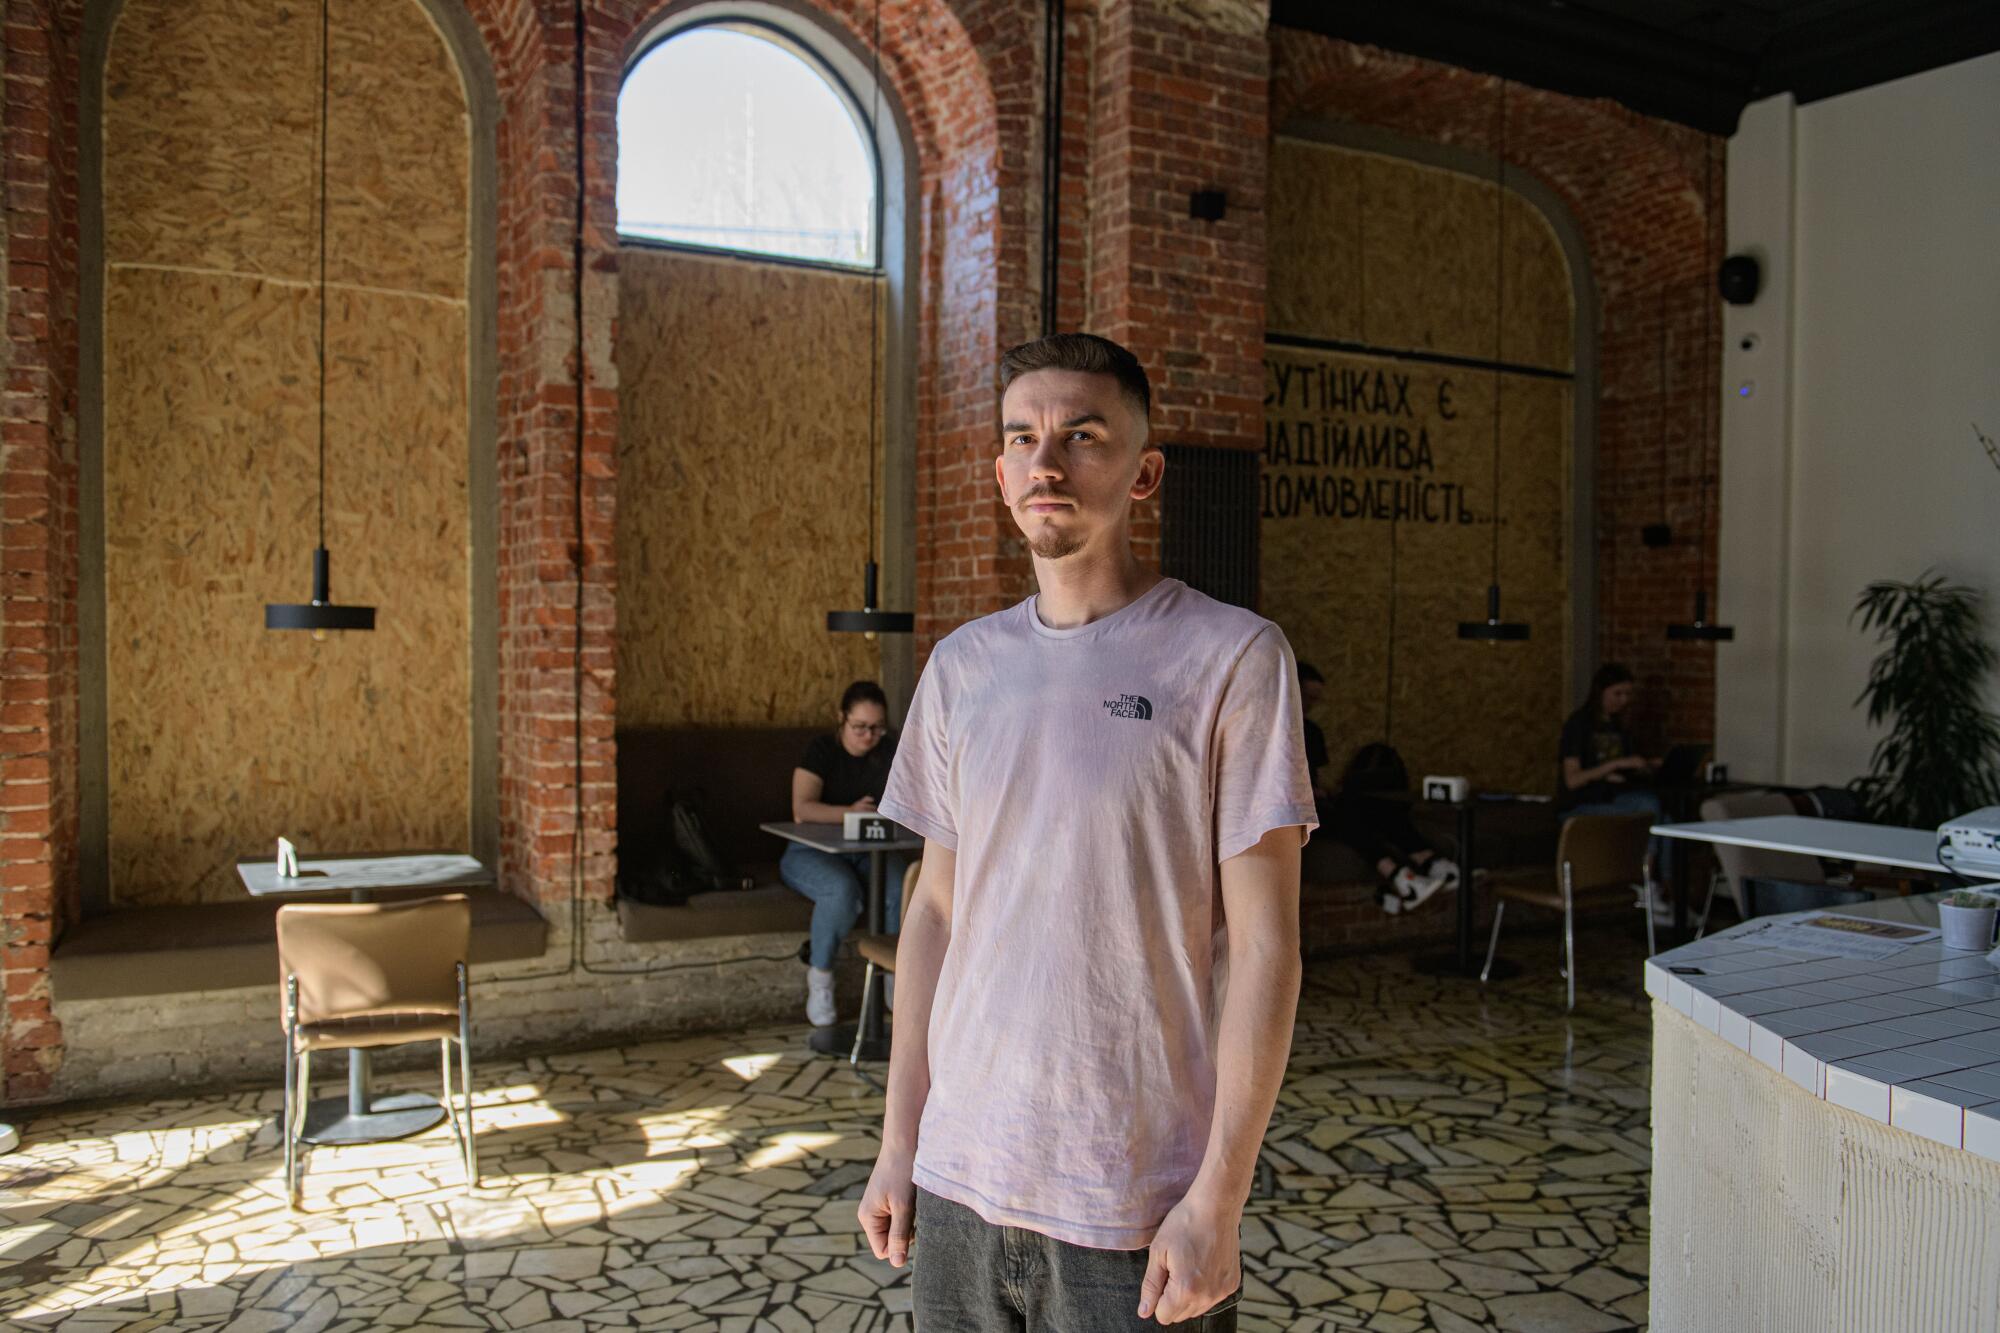 A bearded man in beige T-shirt stands in a cafe with brick walls and boarded-up windows 